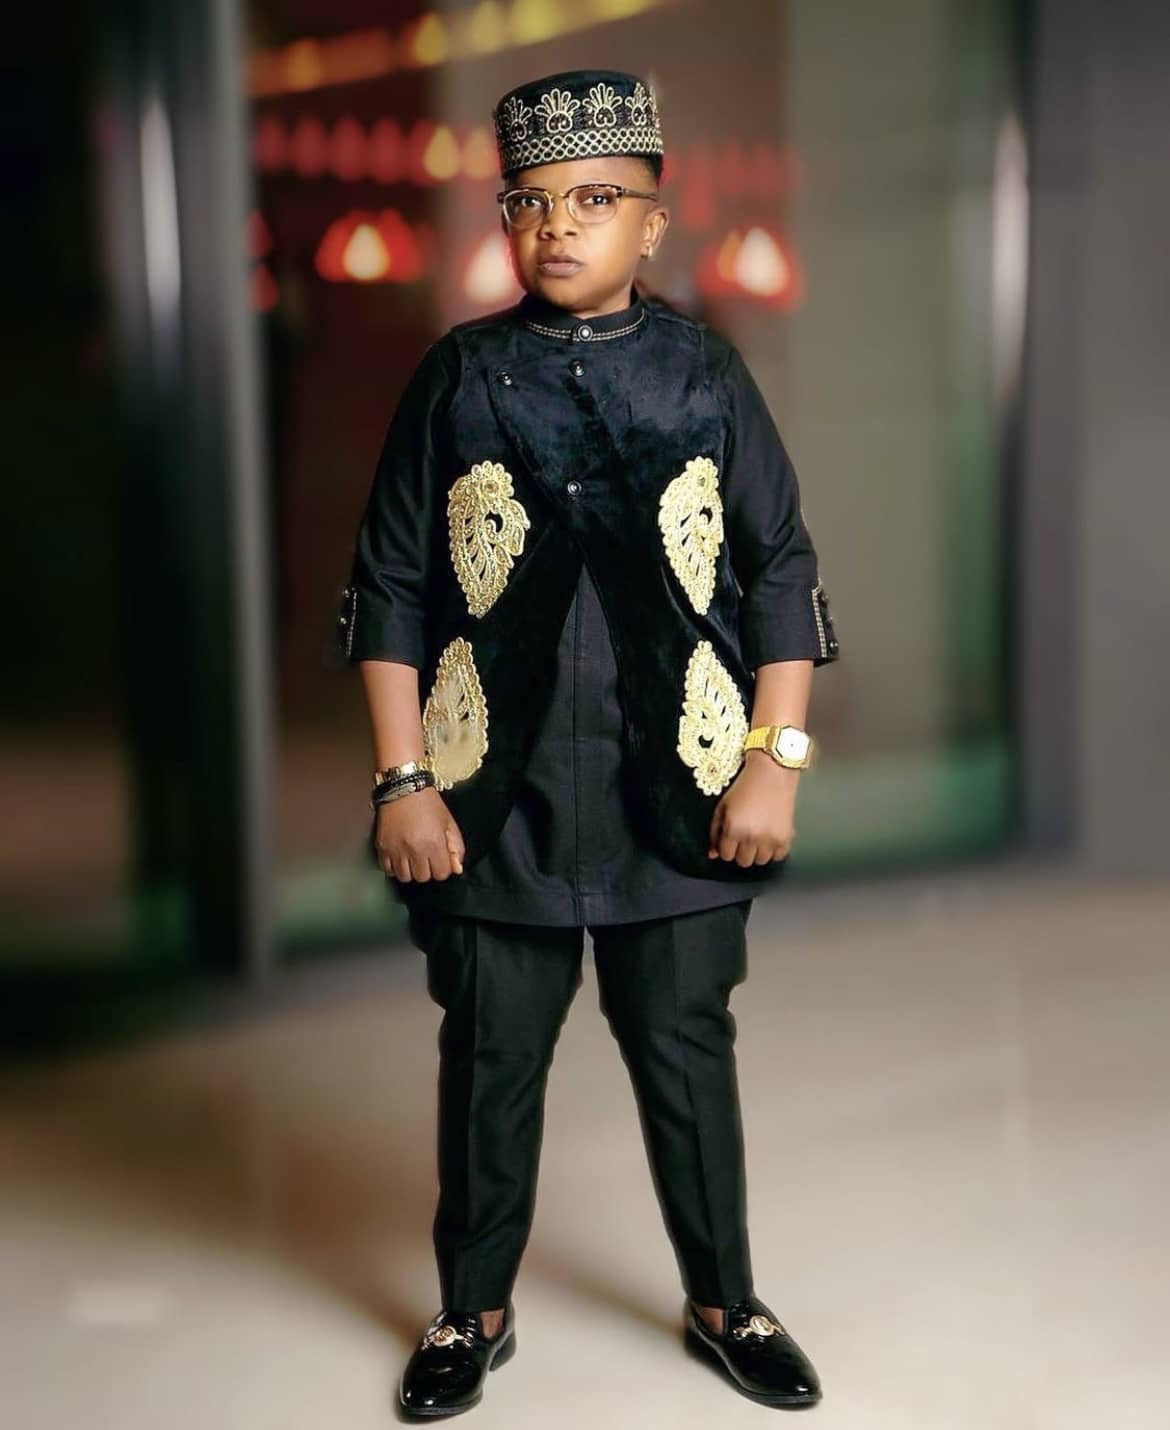 "I wanted to end my life by jumping into third mainland bride" - Chinedu Ikedieze recounts